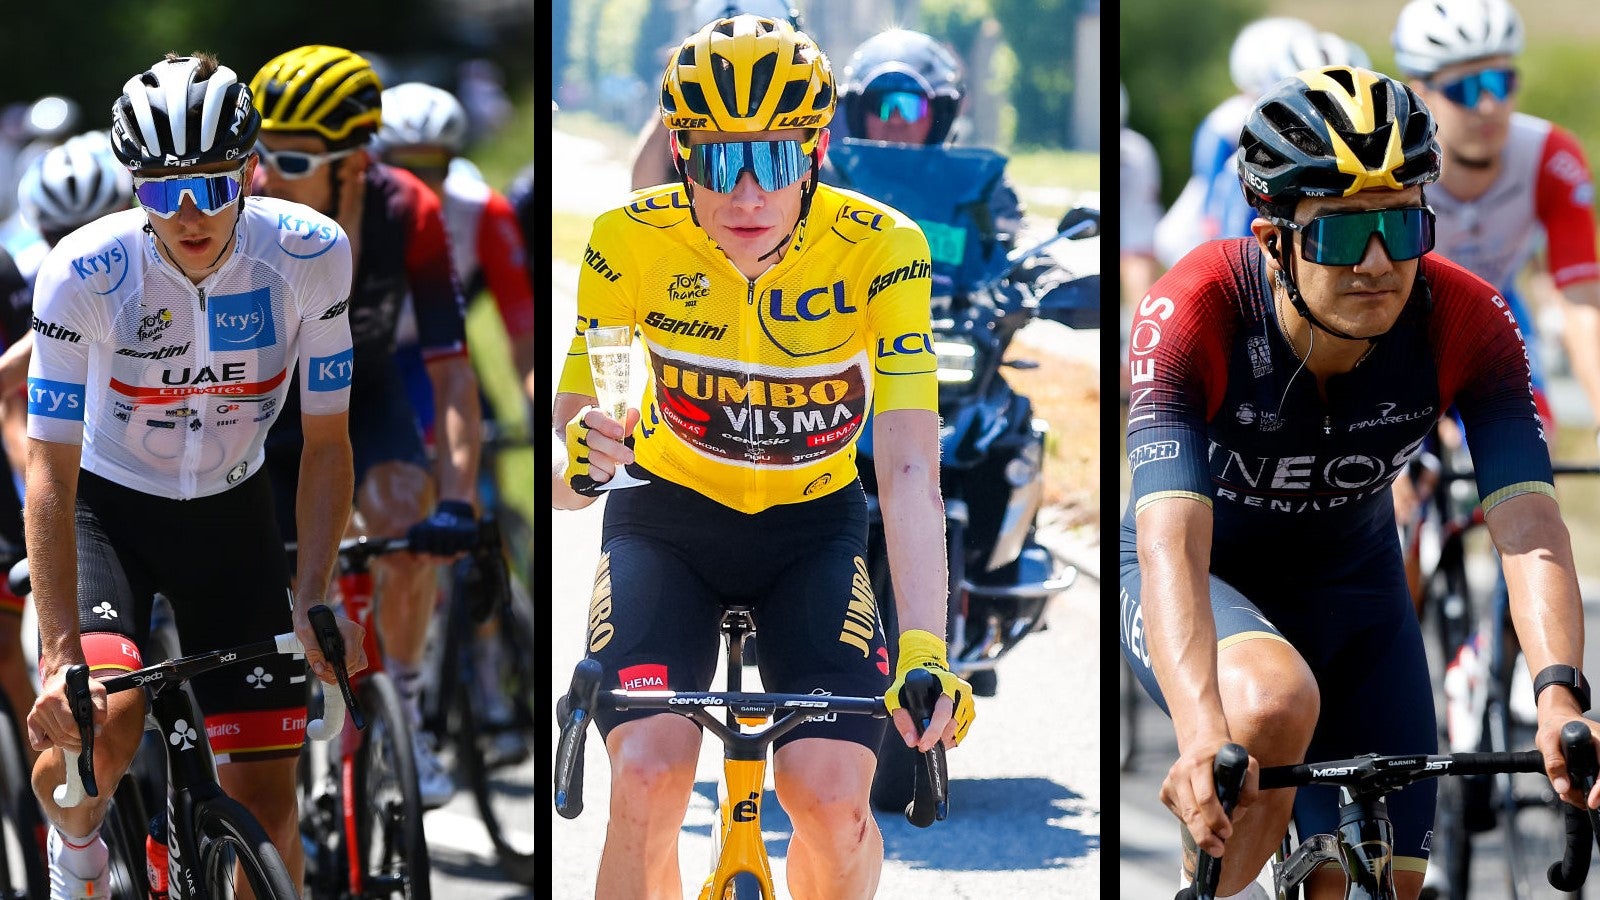 Tour de France 2023: More Exciting Than Yellow? These Are the Green Jersey  Contenders in the Tour